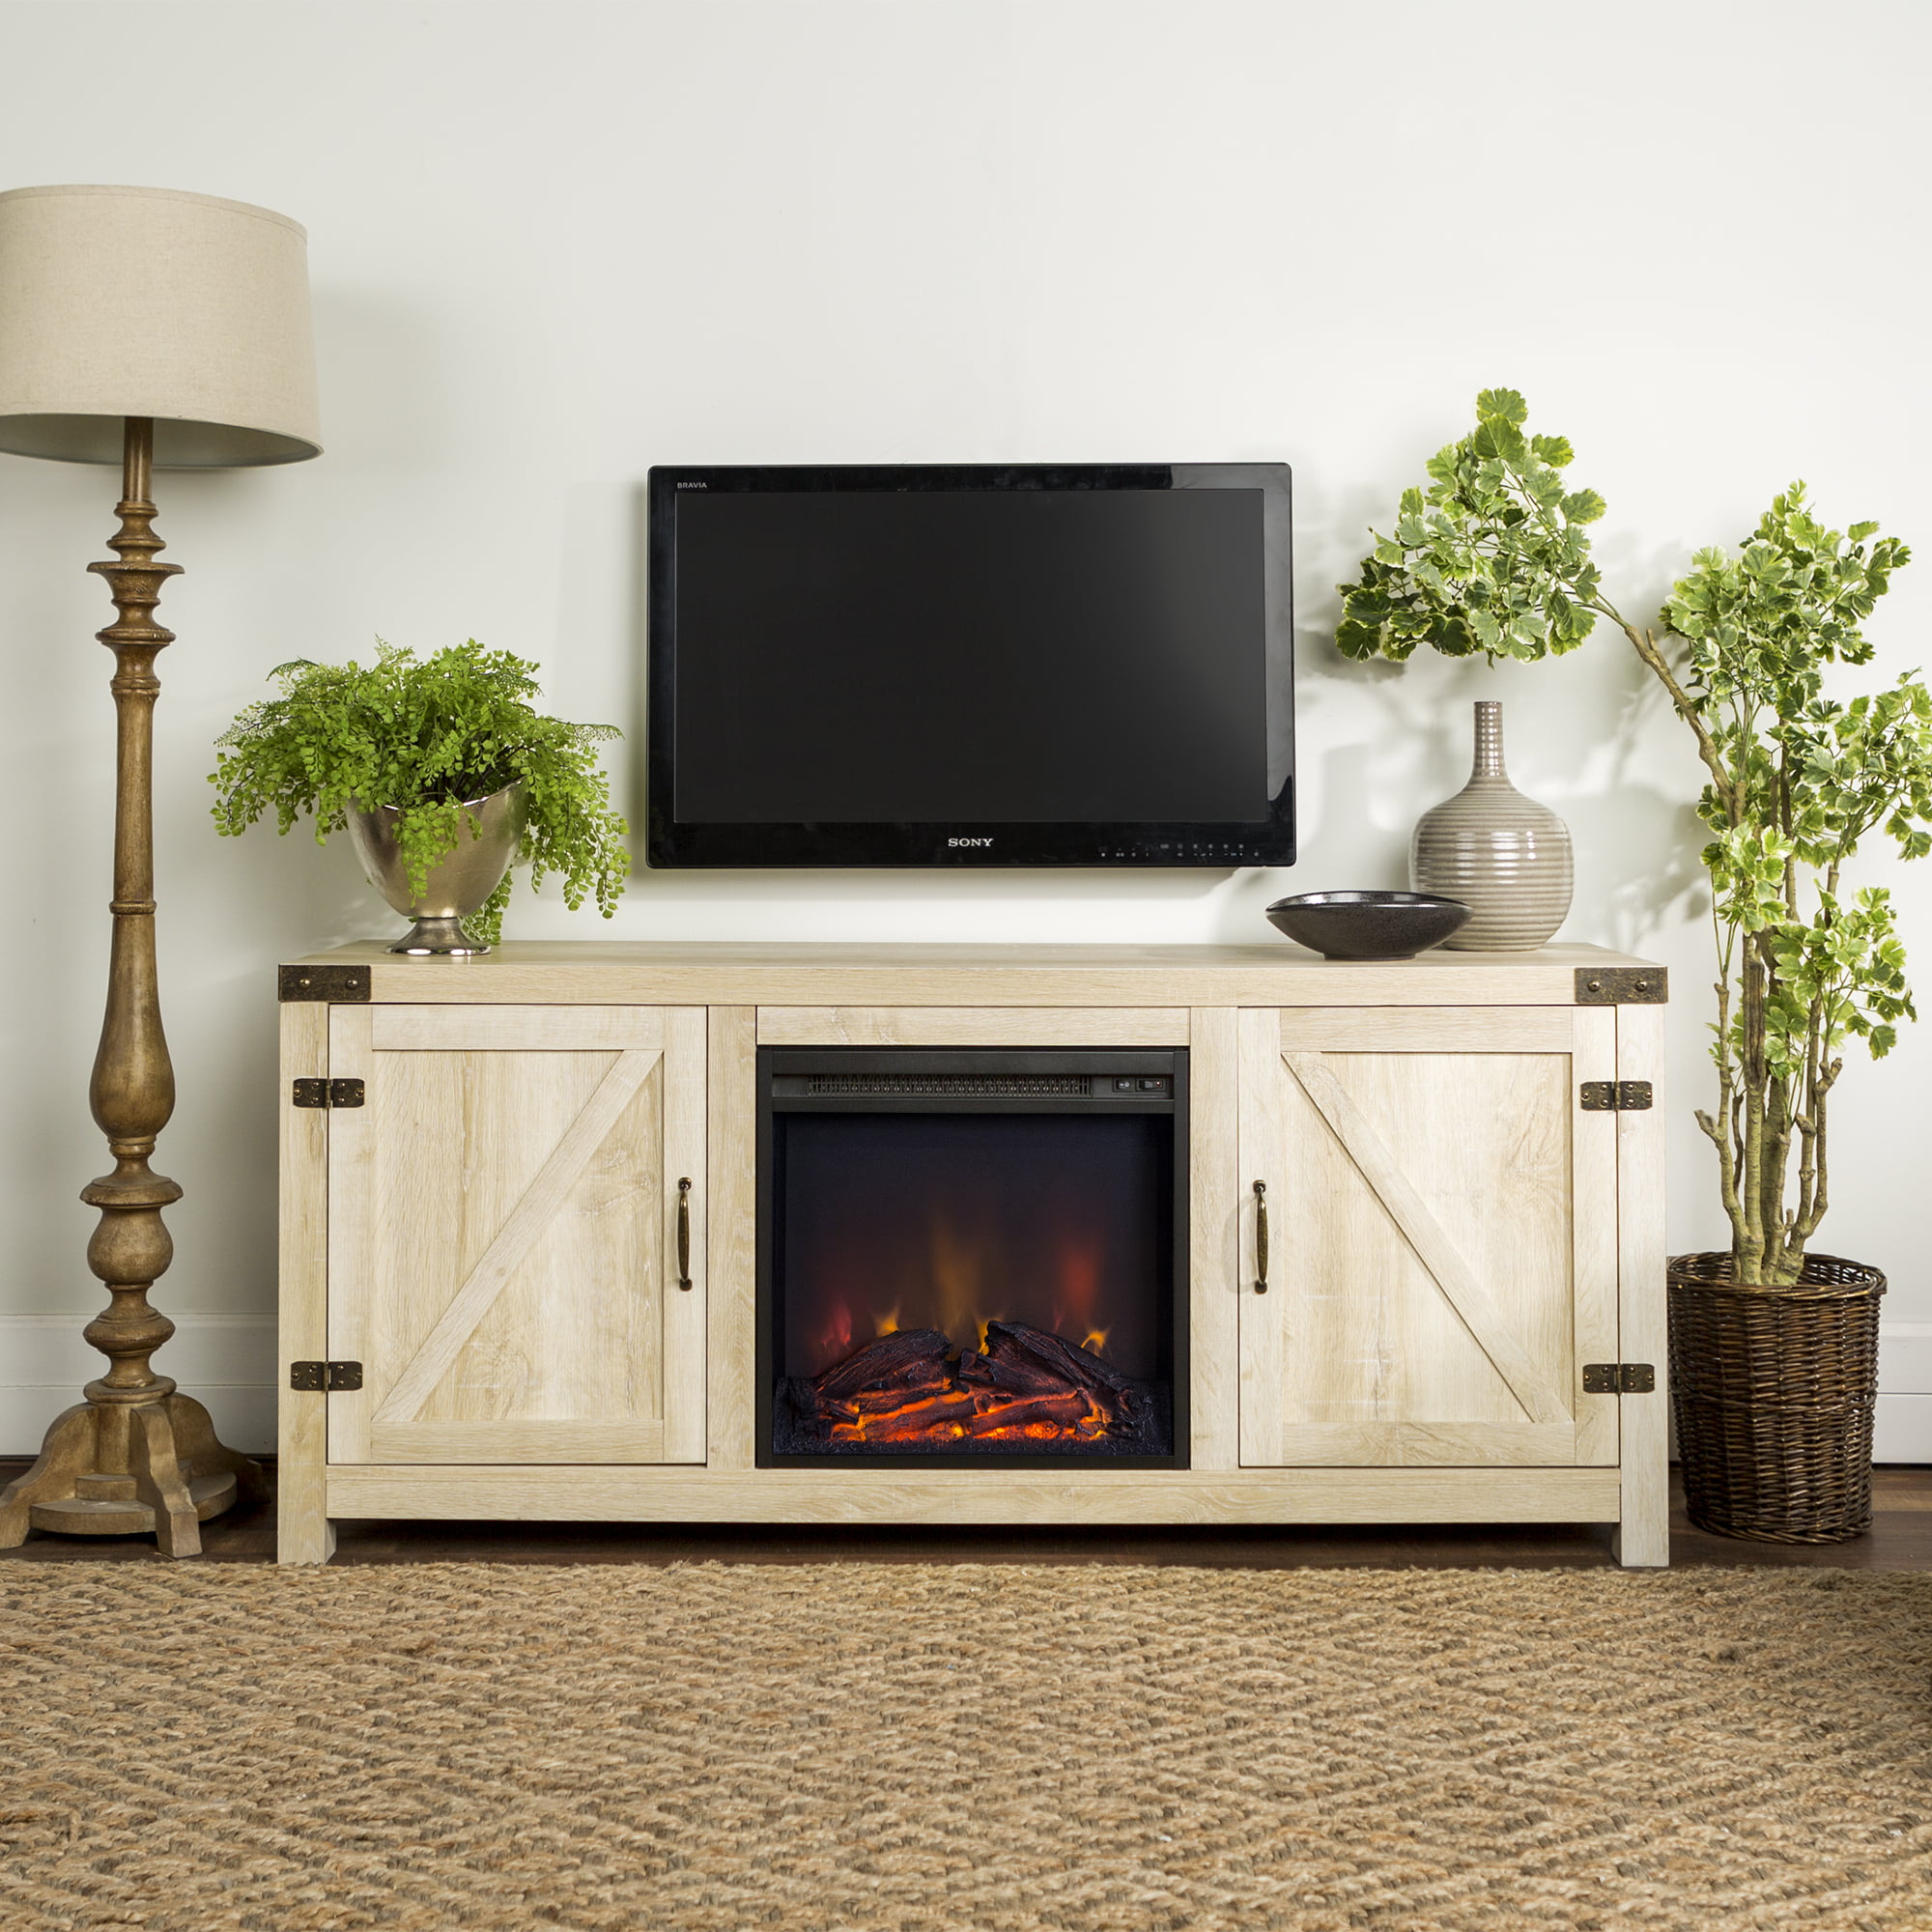 Woven Paths Modern Farmhouse Fireplace, Dresser With Built In Fireplace